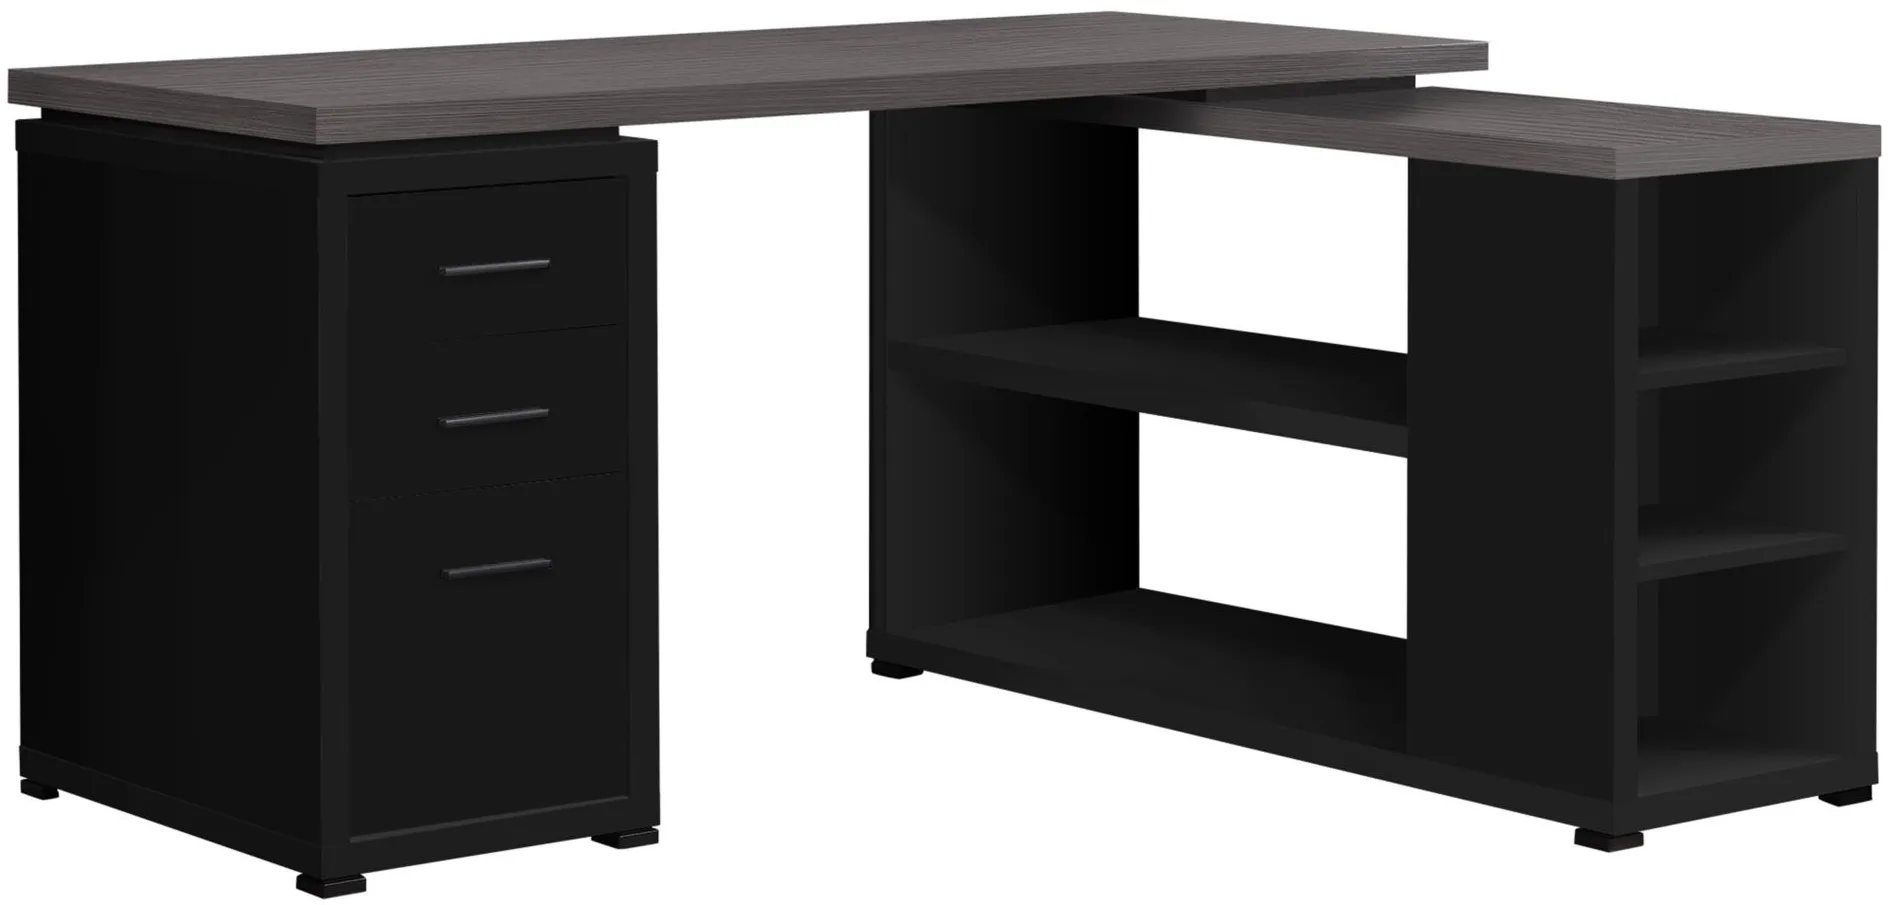 Addison L-Shaped Computer Desk in Black by Monarch Specialties